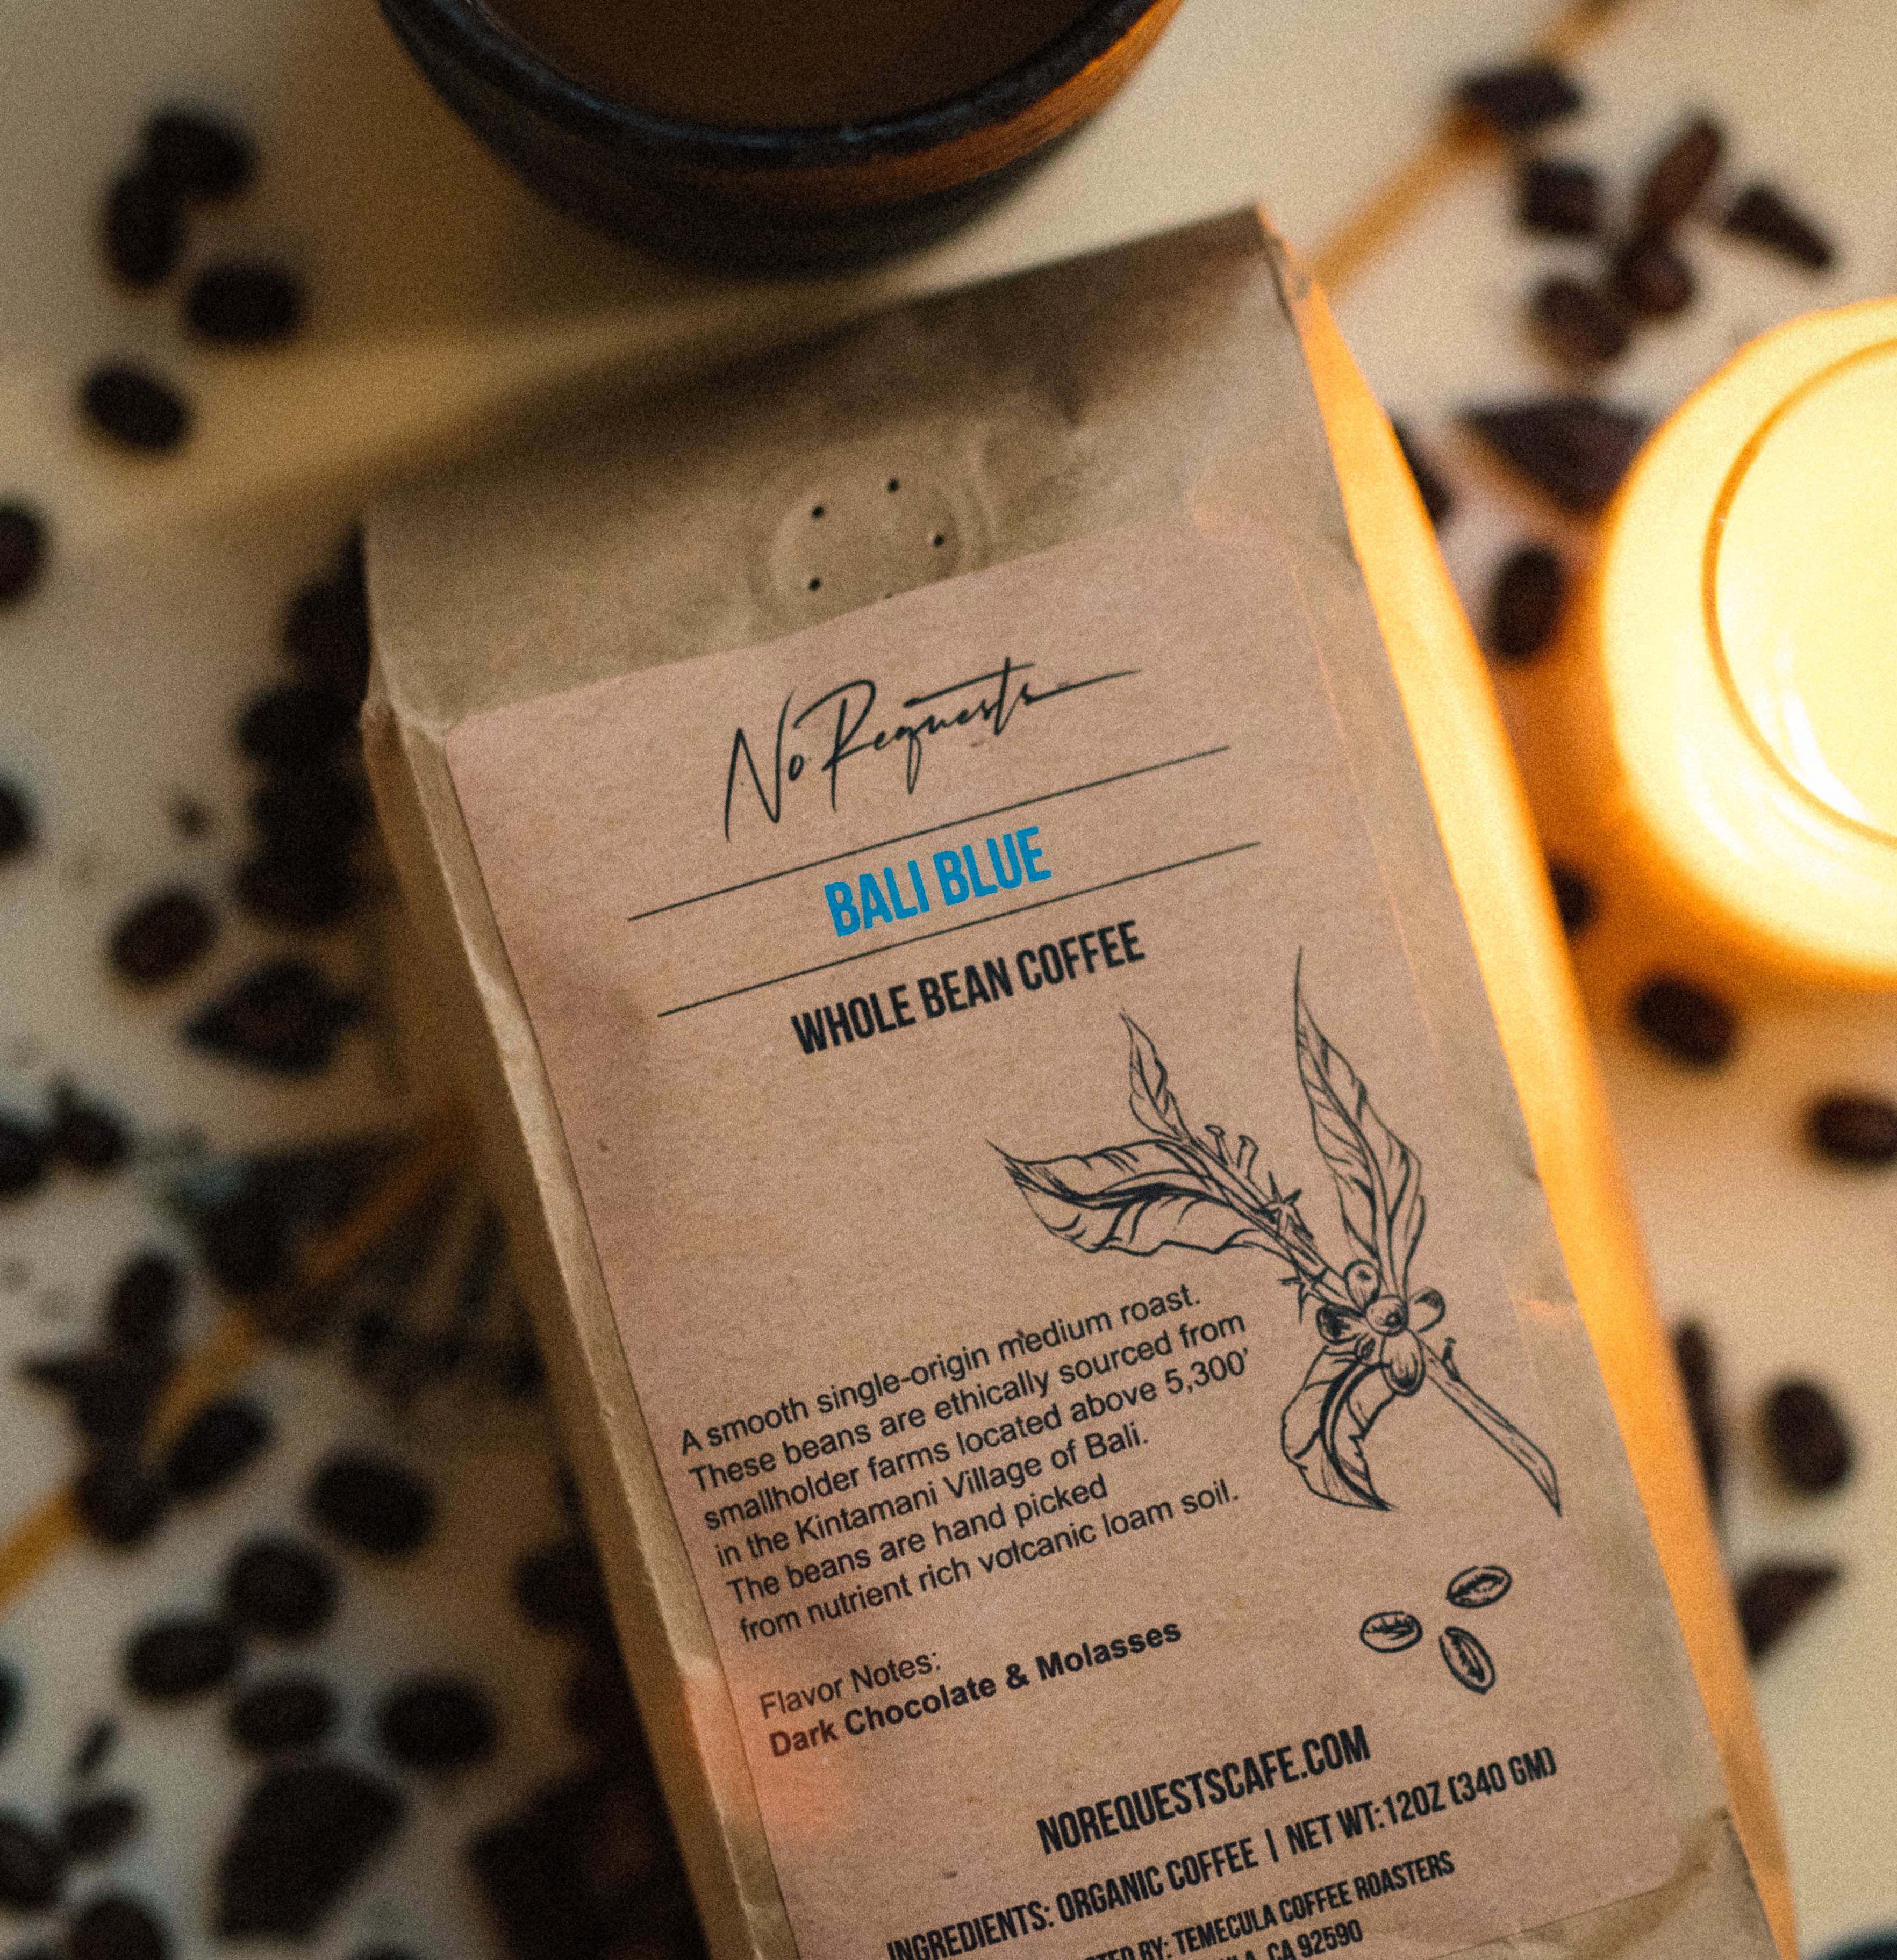 No Requests Organic Coffee: Bali Blue. These coffee beans are ethically sourced from small farms located in the Kintamani Village of Bali